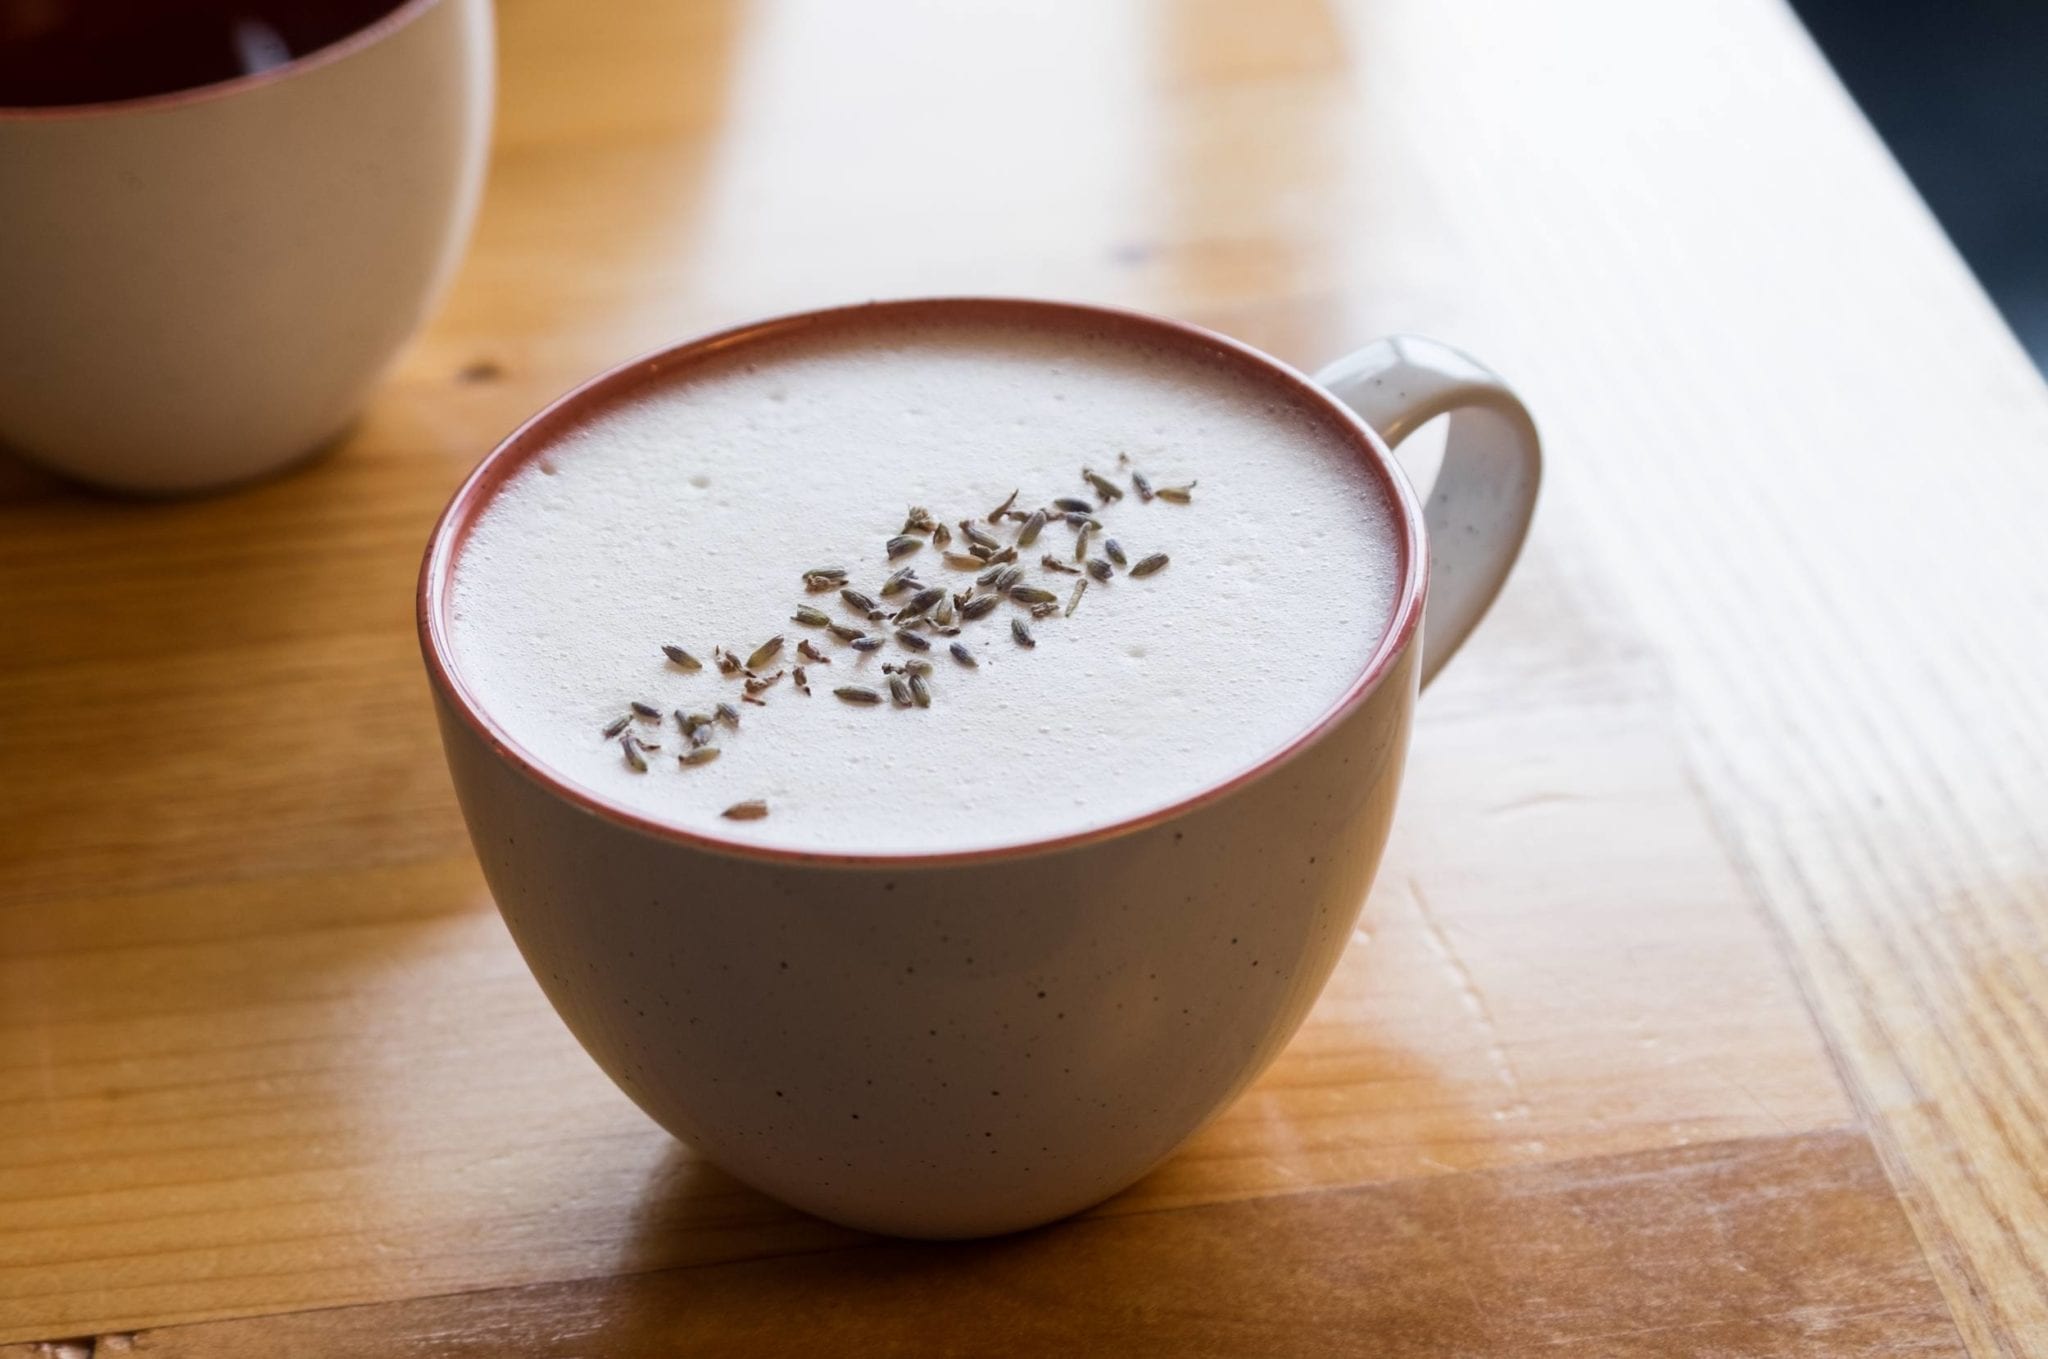 A latte topped with lavender seeds (which are not tasty).